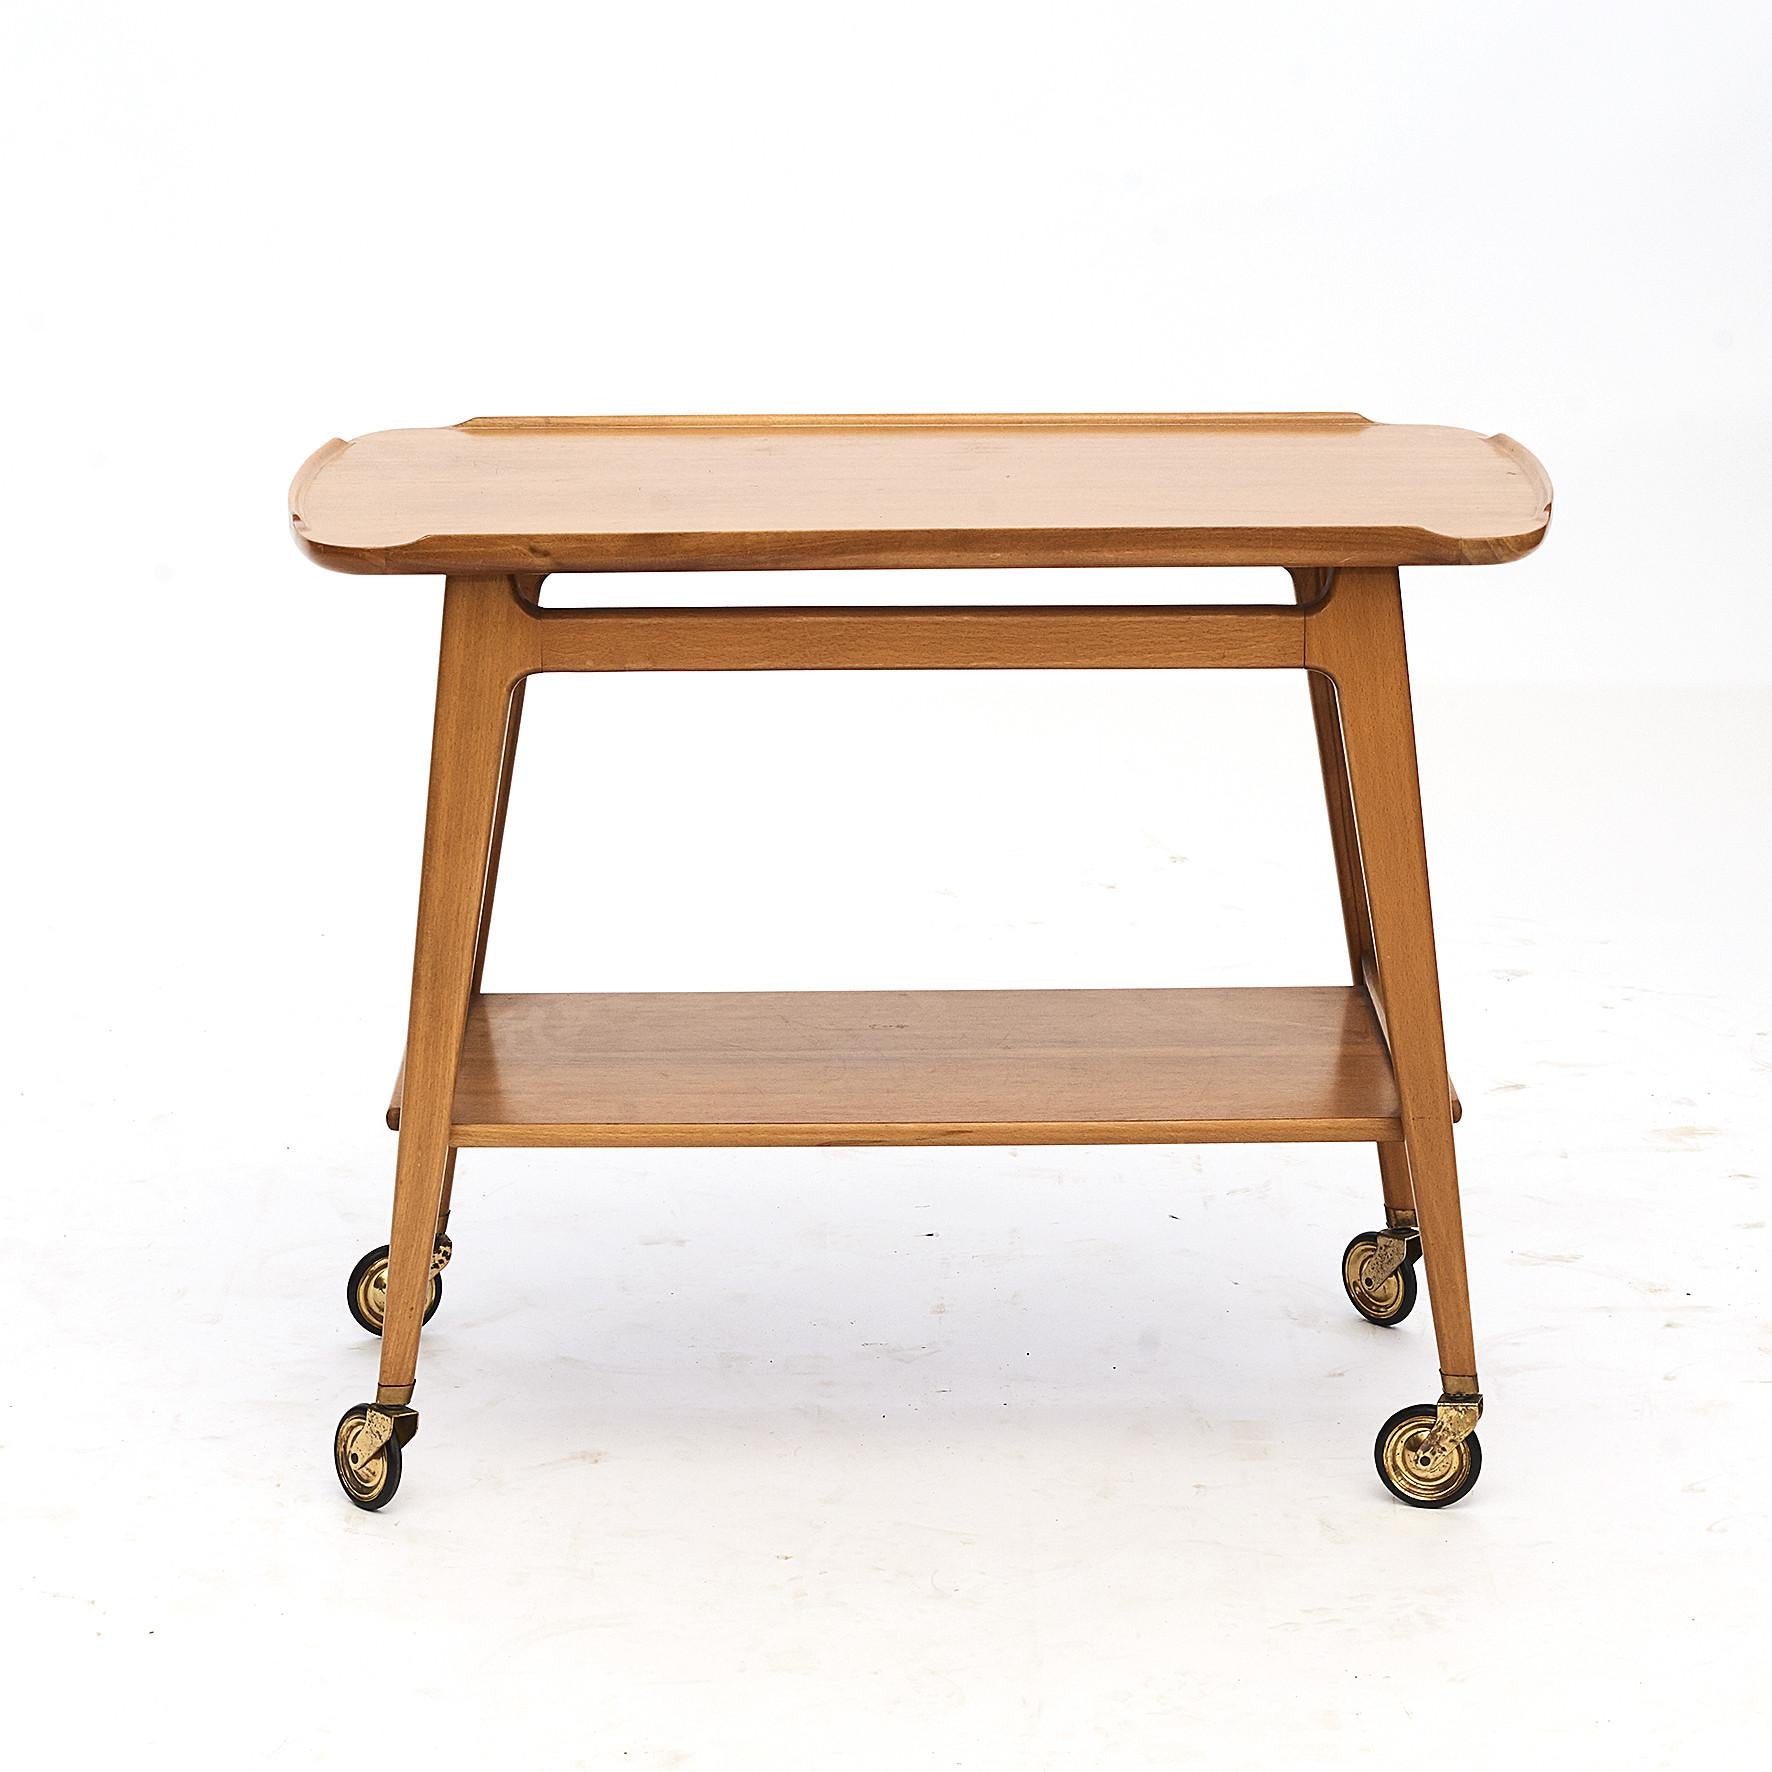 Midcentury serving trolley or bar cart made from walnut and beechwood.
Manufactured by Lotos, Germany, 1960s.